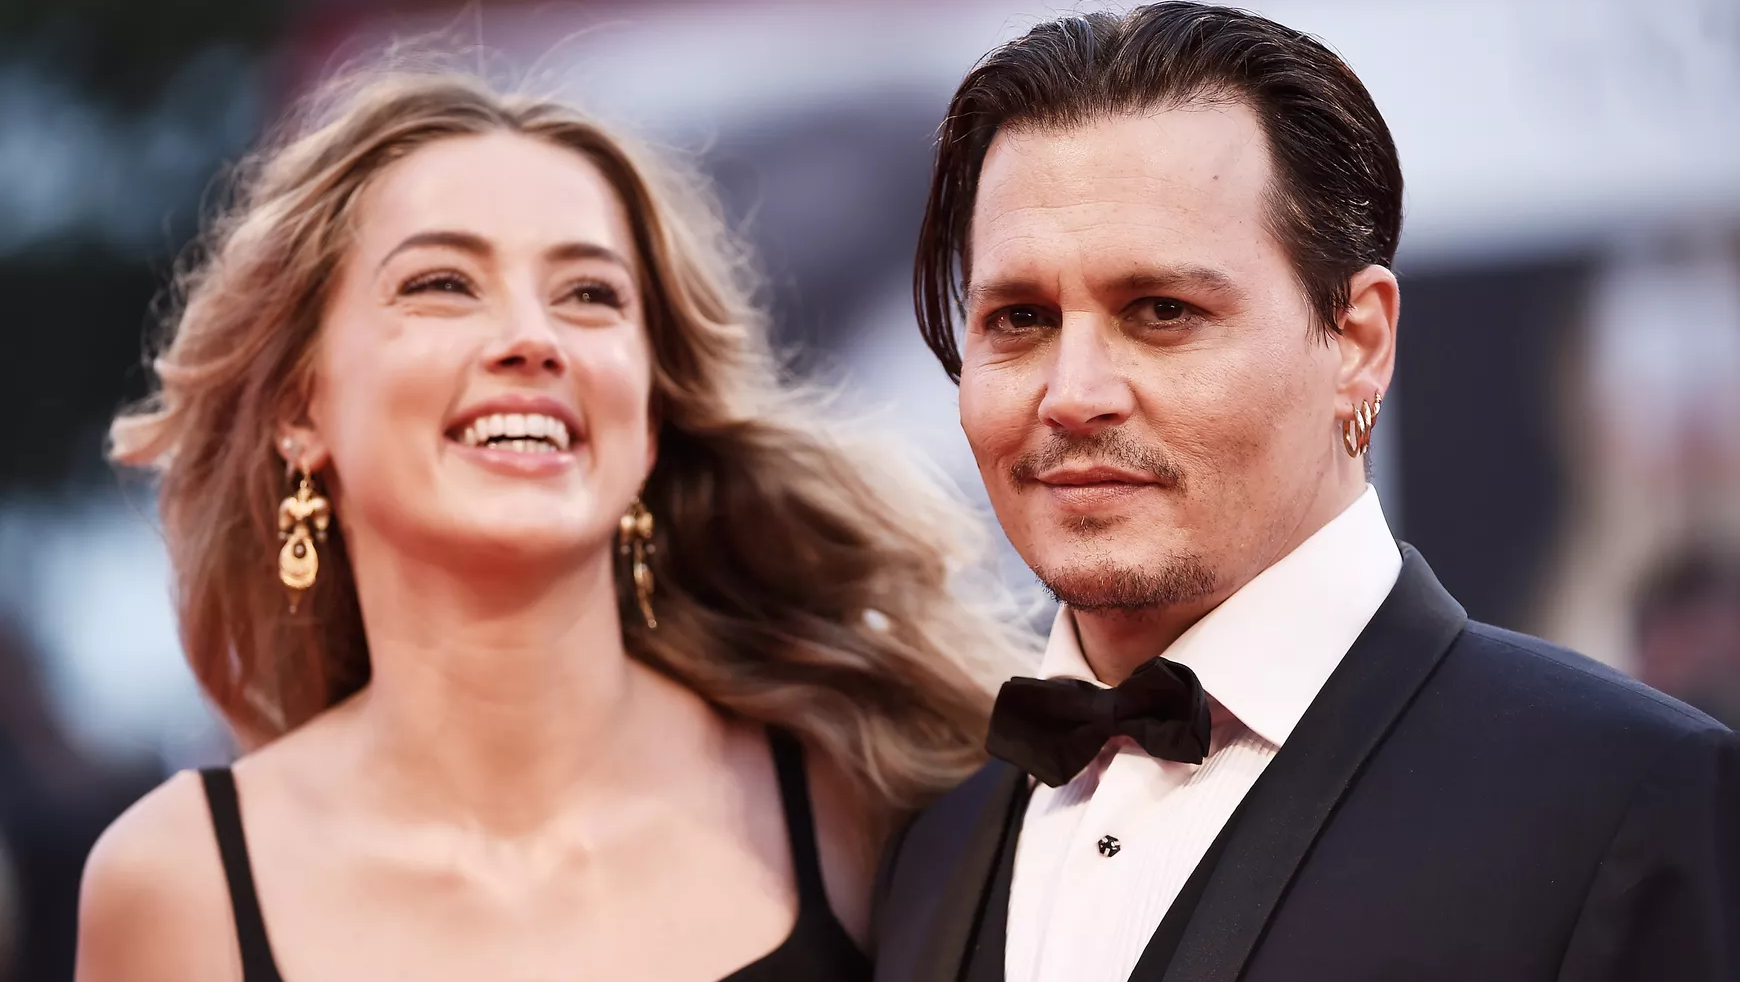 Amber Heard Wanted Johnny Depp to Know ‘I Loved Him’ and Admitted ‘I Am Sorry’